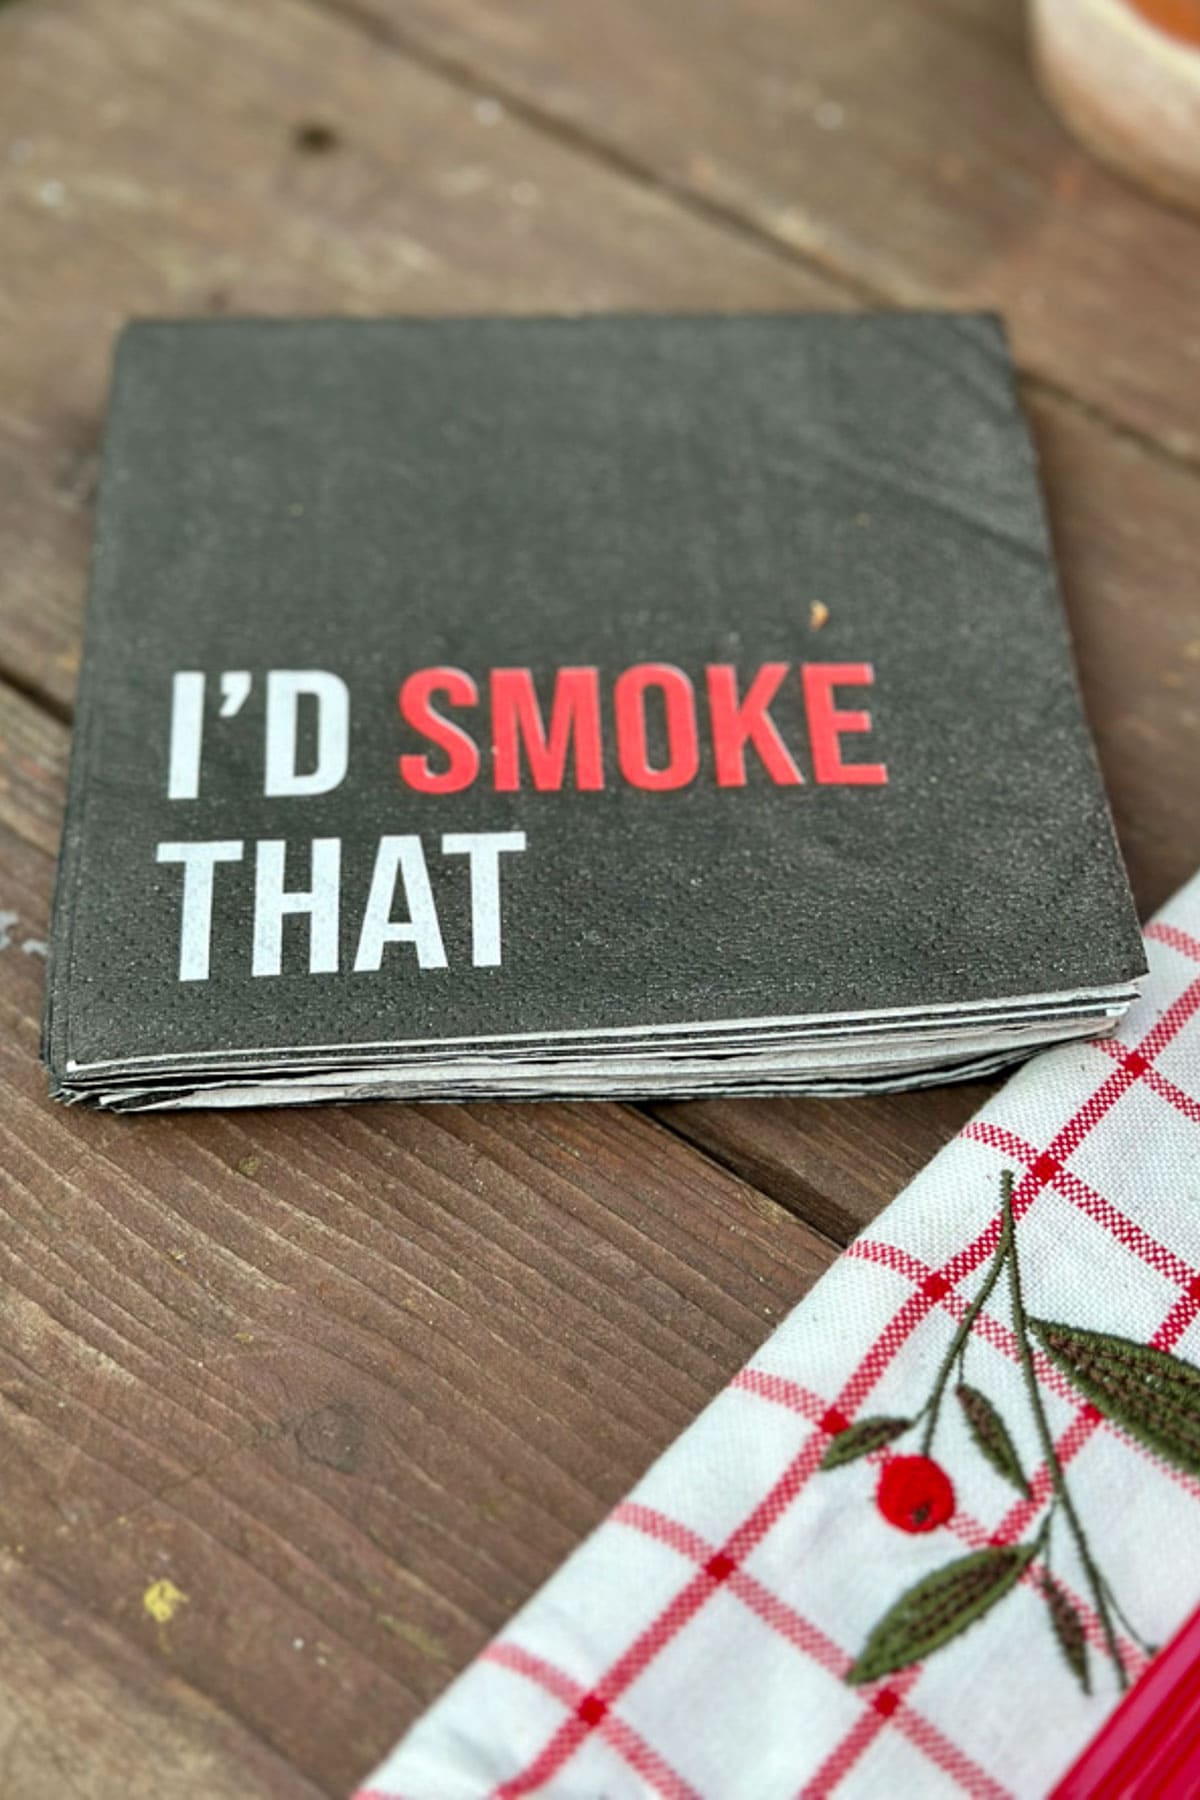 COCKTAIL NAPKINS THAT SAY I'D SMOKE THAT. THIS HAPPENS TO BE THE THEM FOR MY SUMMER TABLESCAPE. 